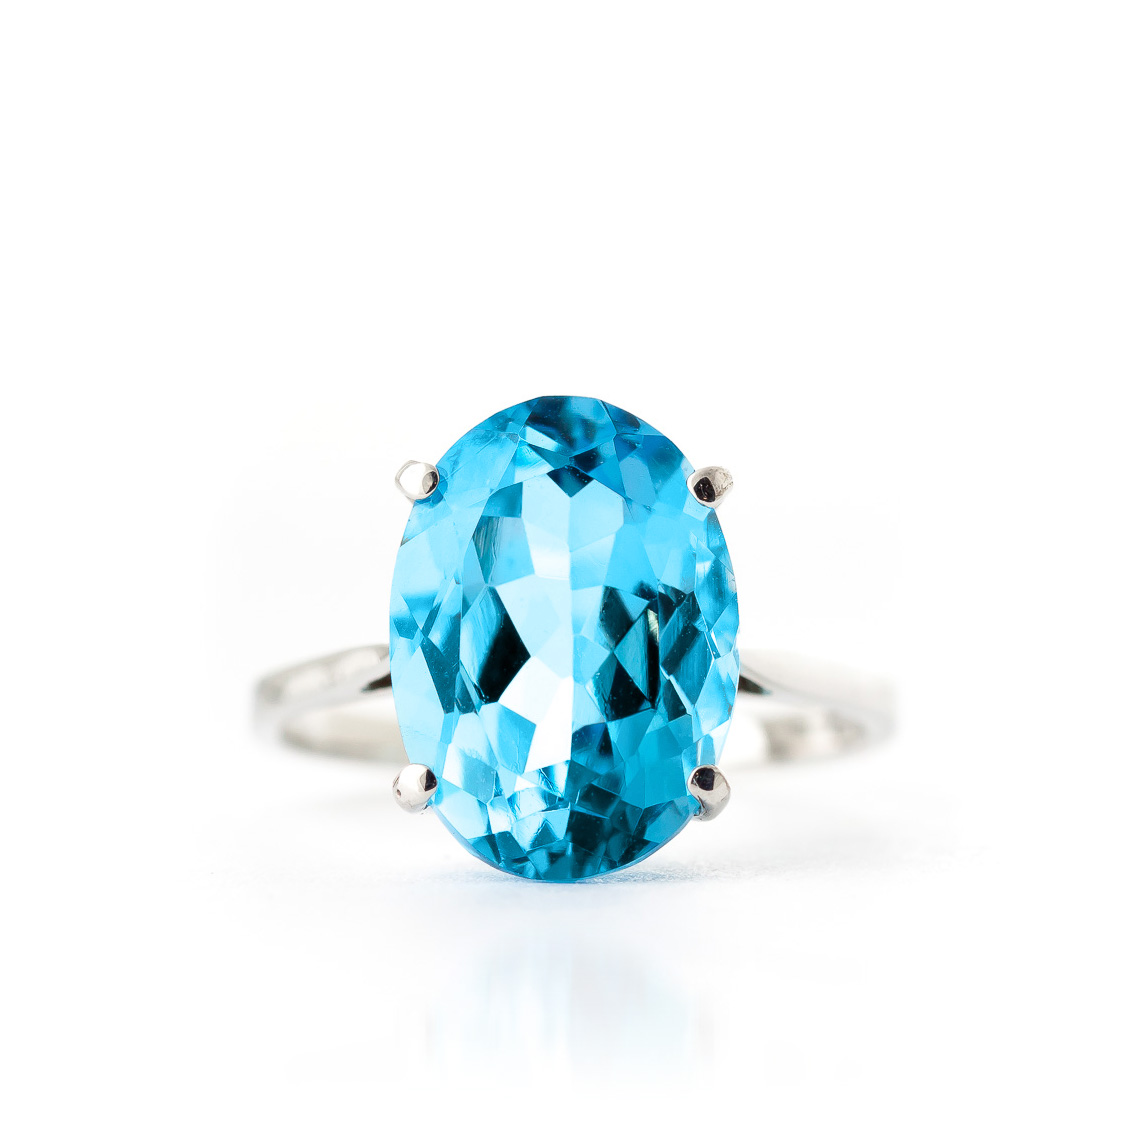 Galaxy Gold 8 Carat 14k Solid White Gold Ring Natural Oval Blue Topaz (10) - image 4 of 5